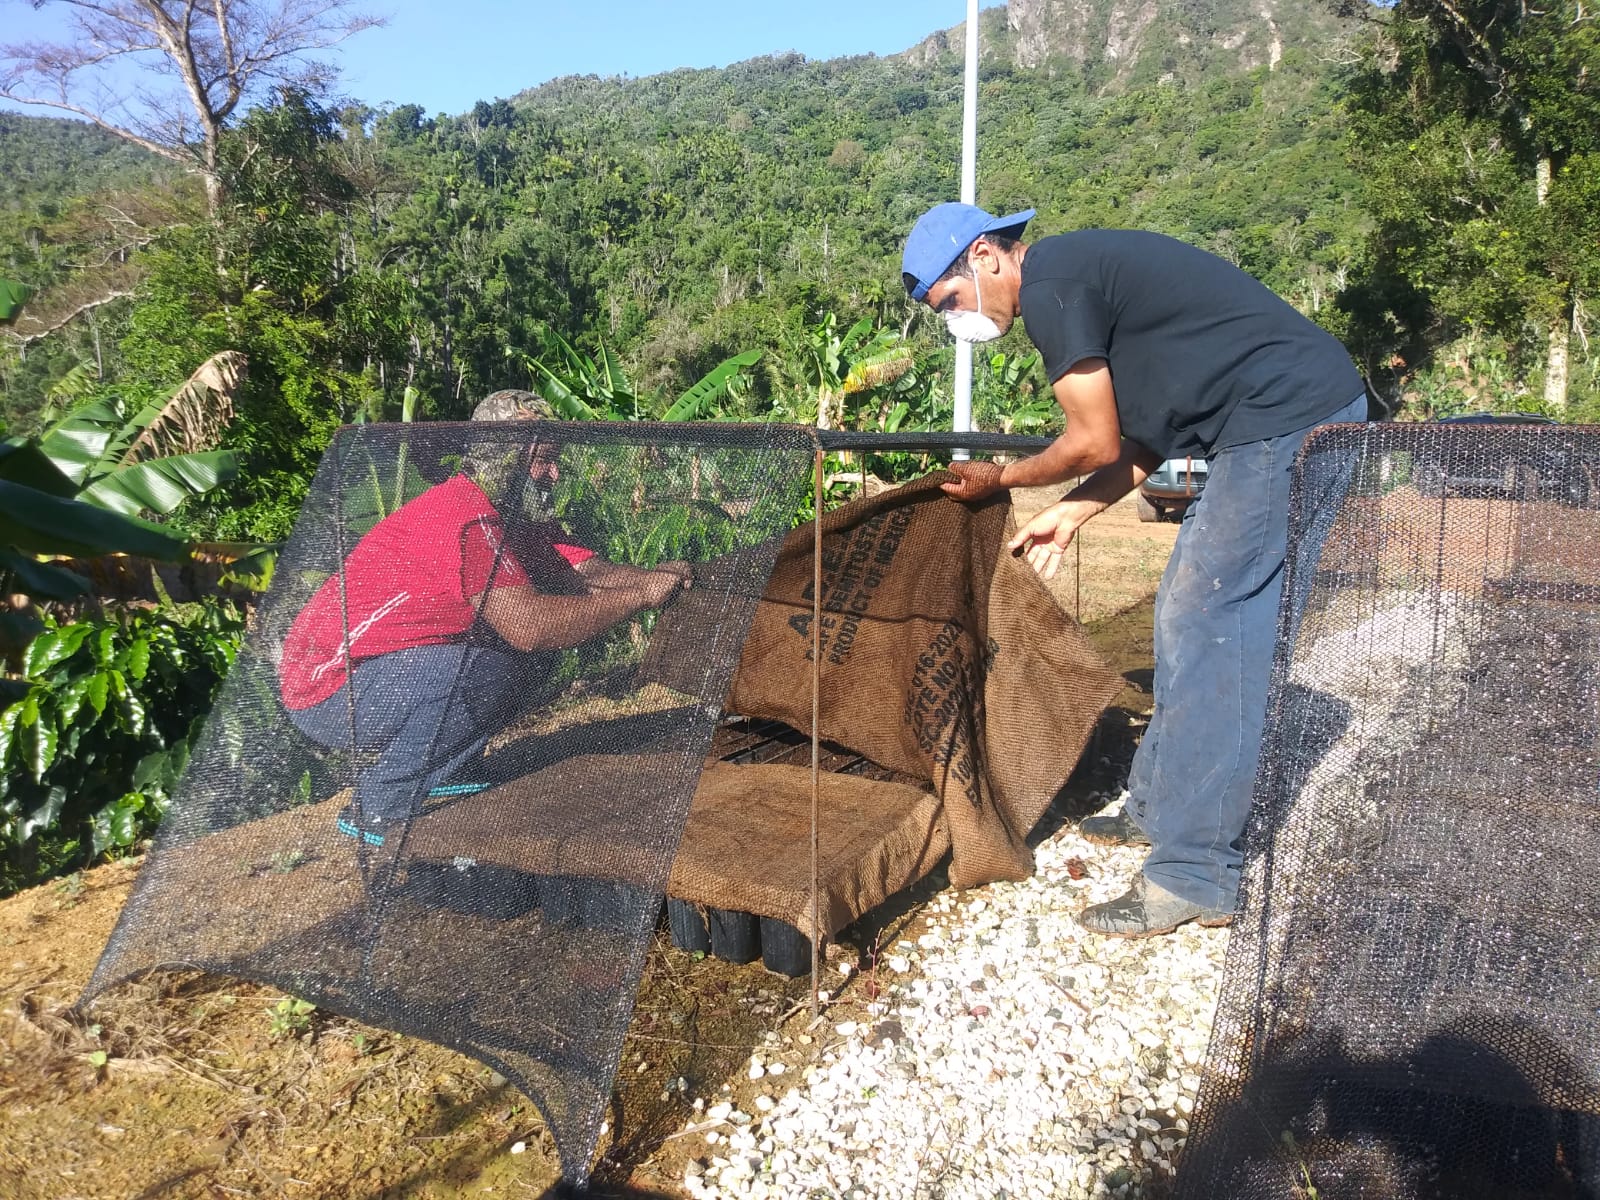 Coffee farmers in Puerto Rico work on their land